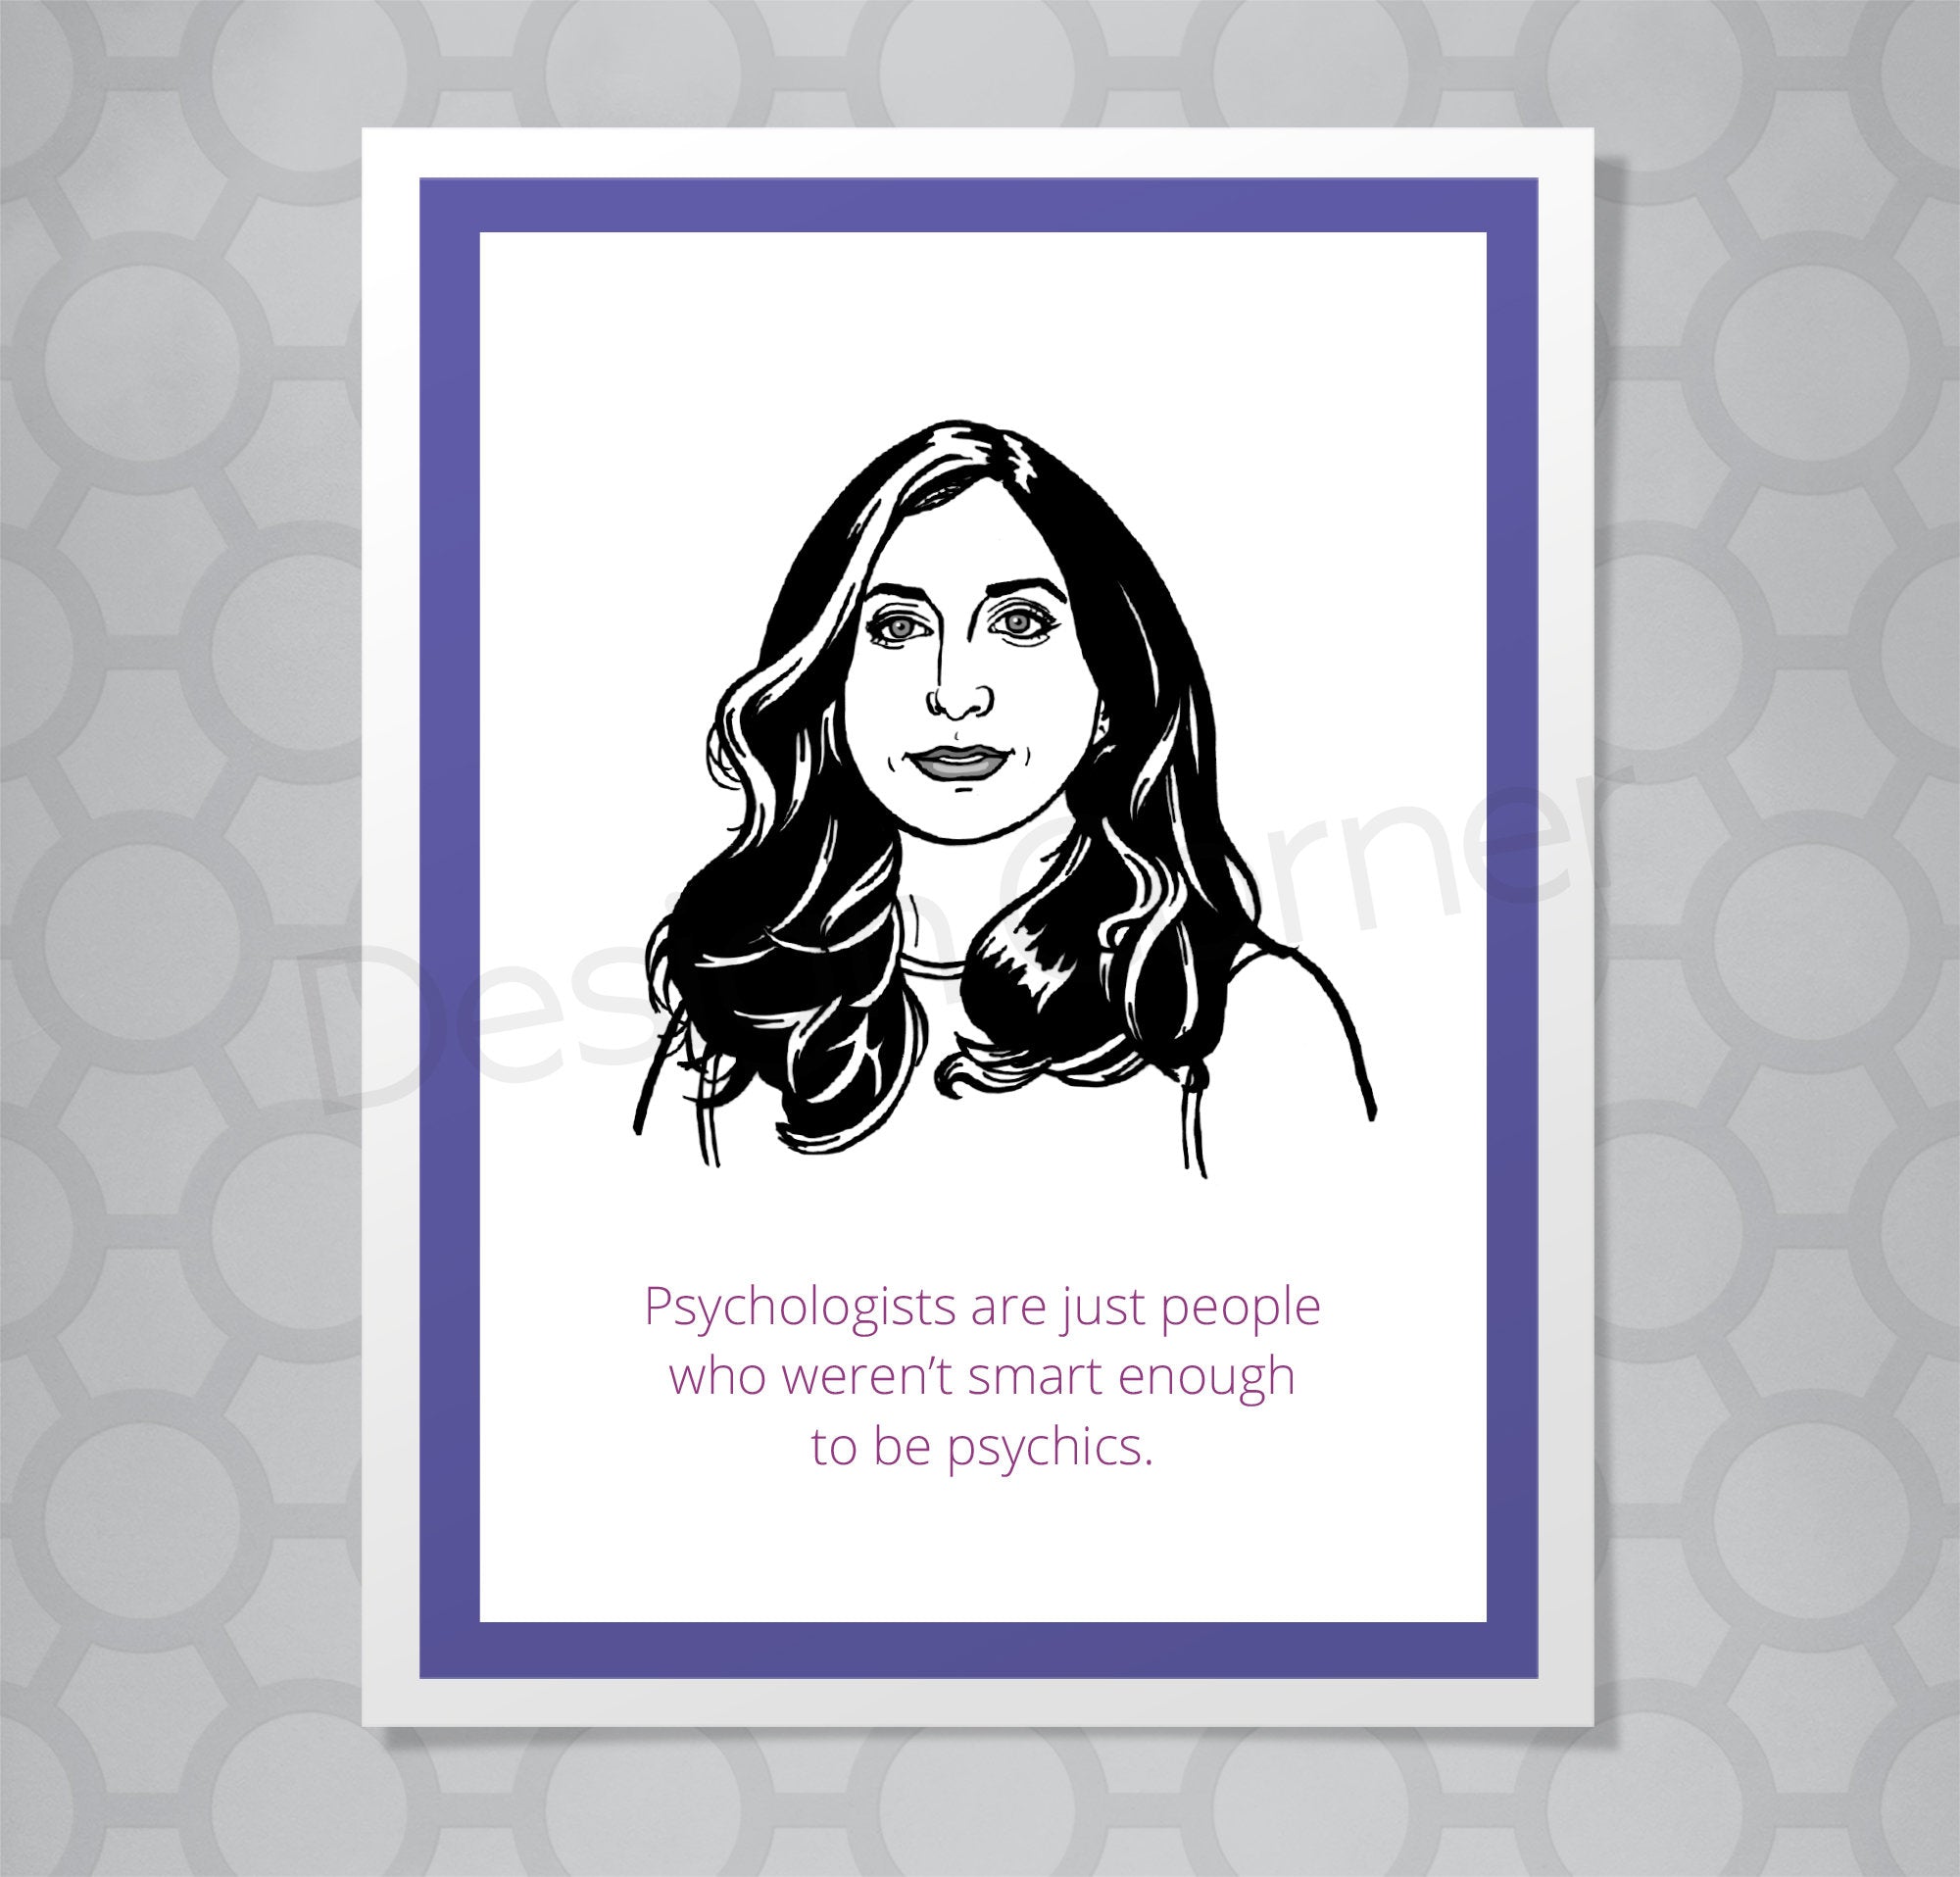 Greeting card with Illustration of Brooklyn Nine Nine's Gina. Caption says "Psychologists are just people who weren't smart enough to be psychics."